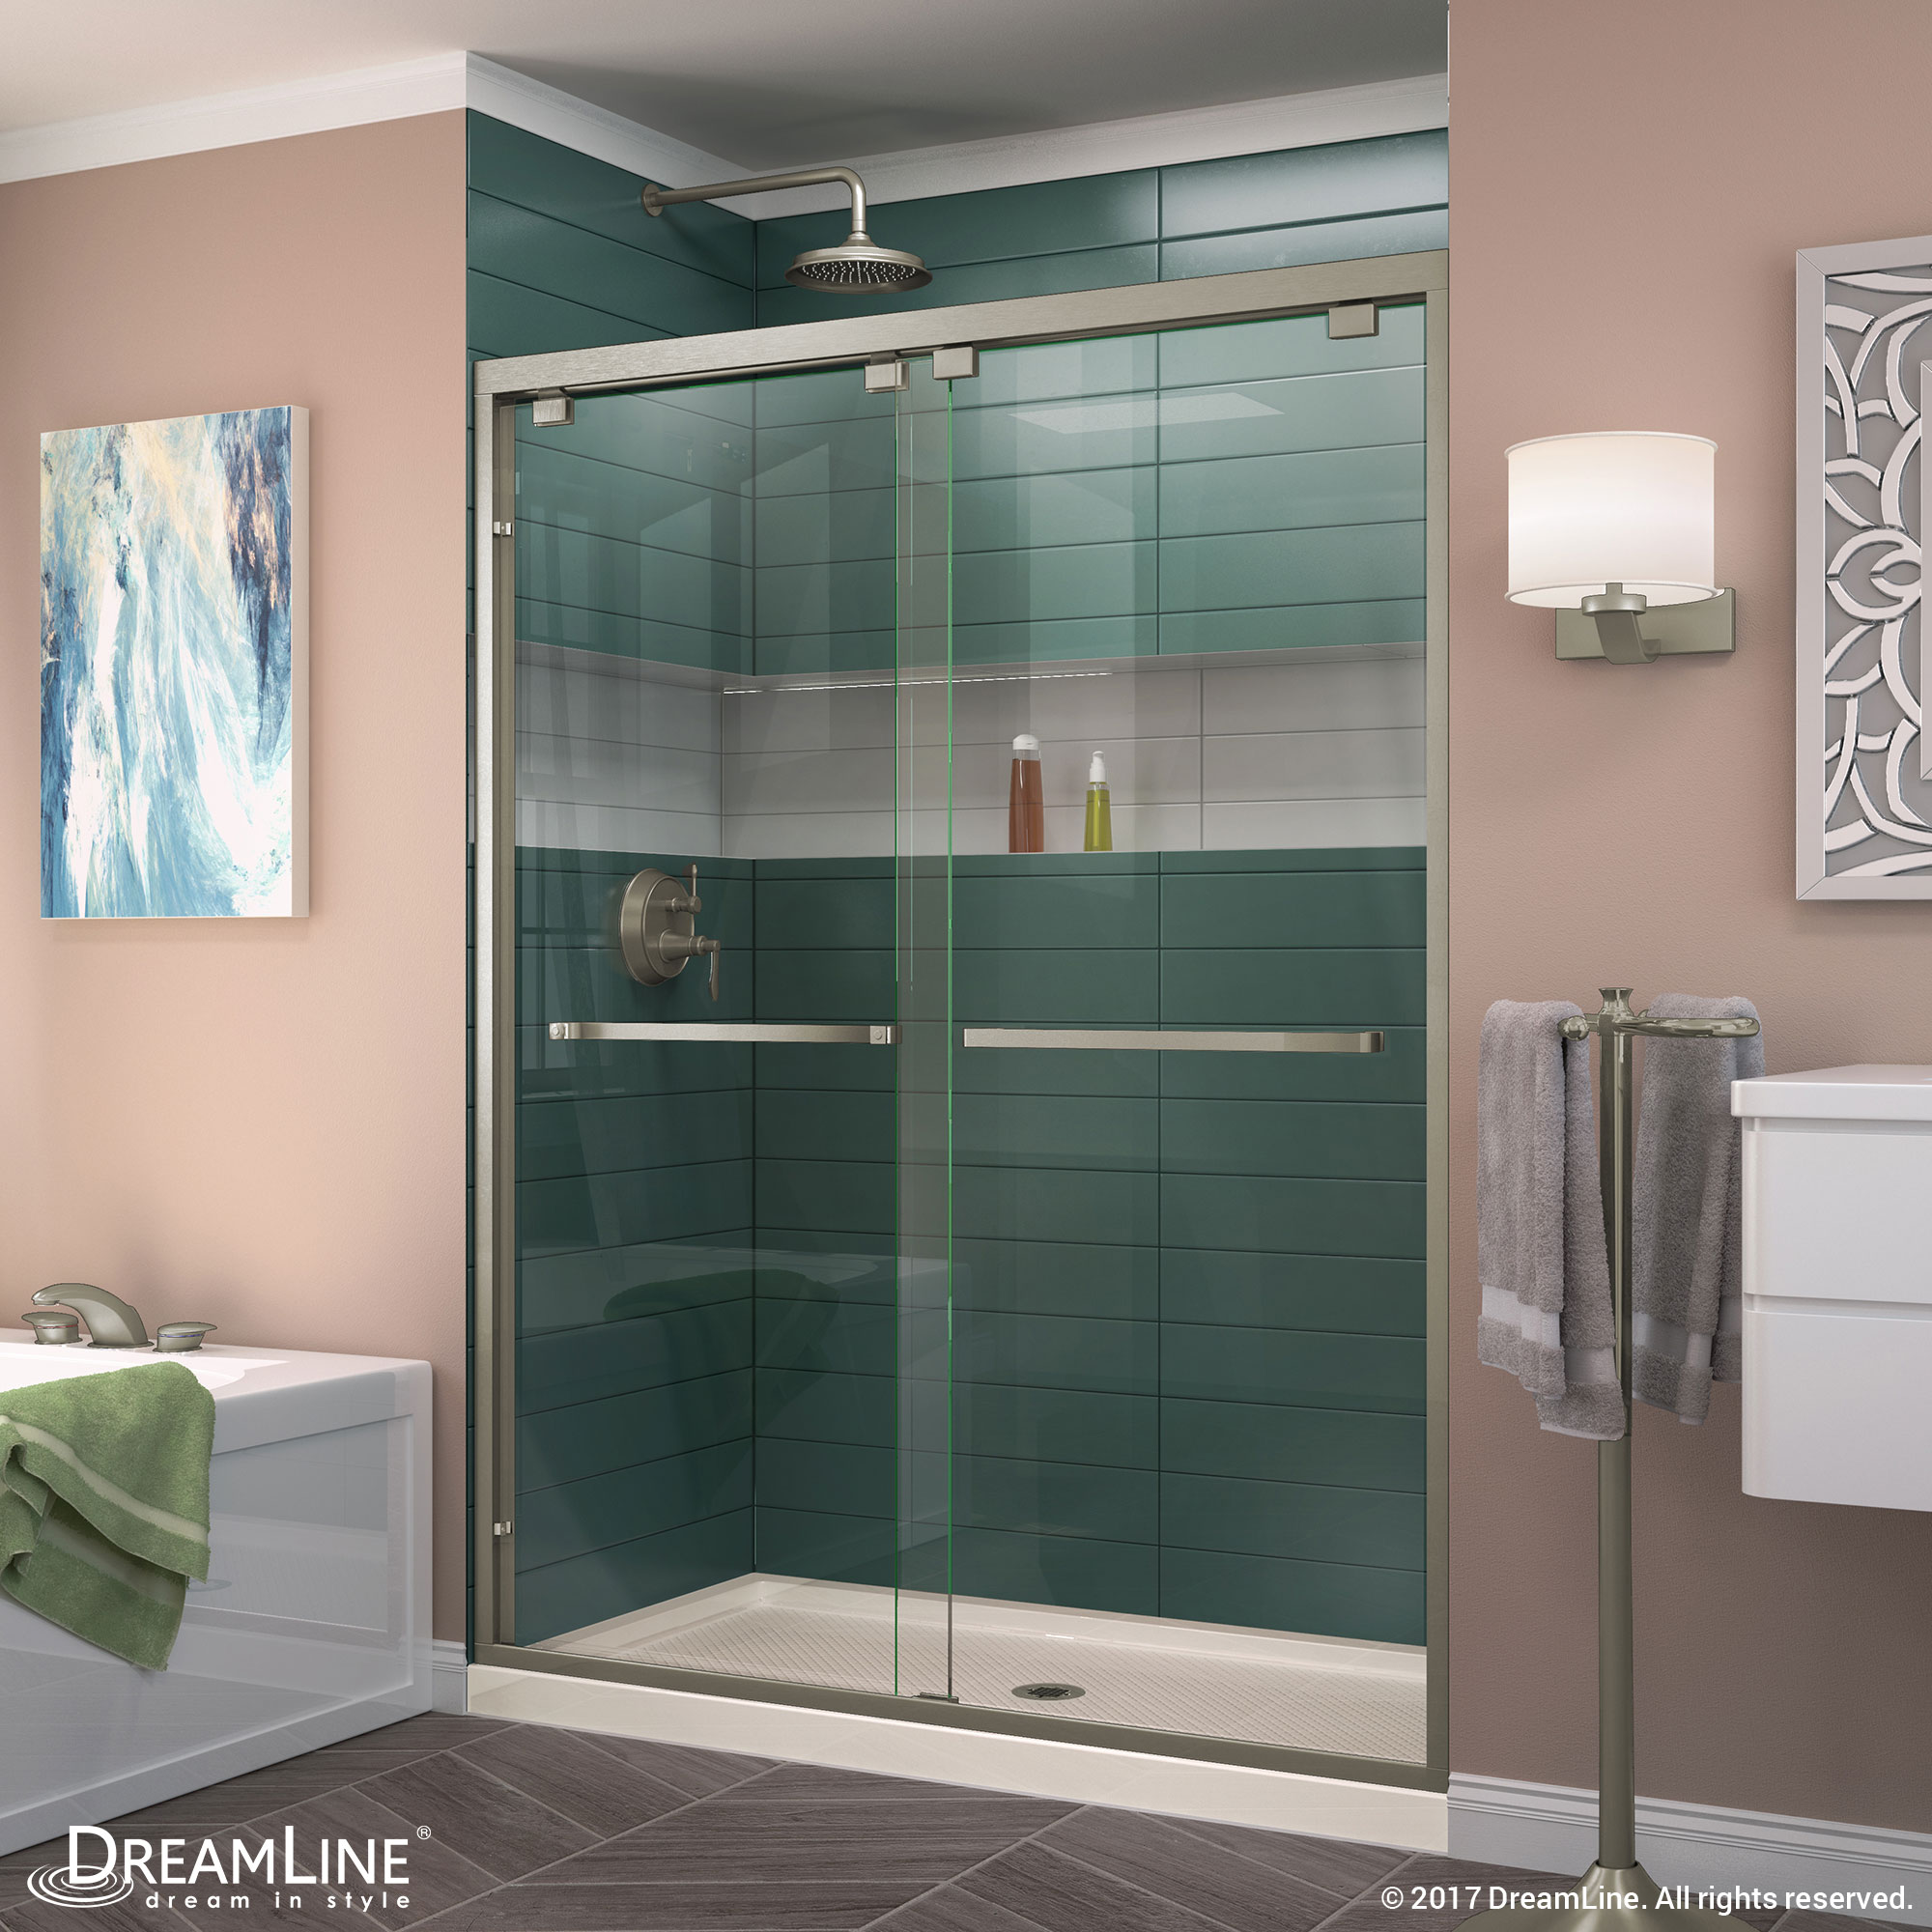 DreamLine Encore 32 in. D x 48 in. W x 78 3/4 in. H Bypass Shower Door in Brushed Nickel and Center Drain White Base Kit